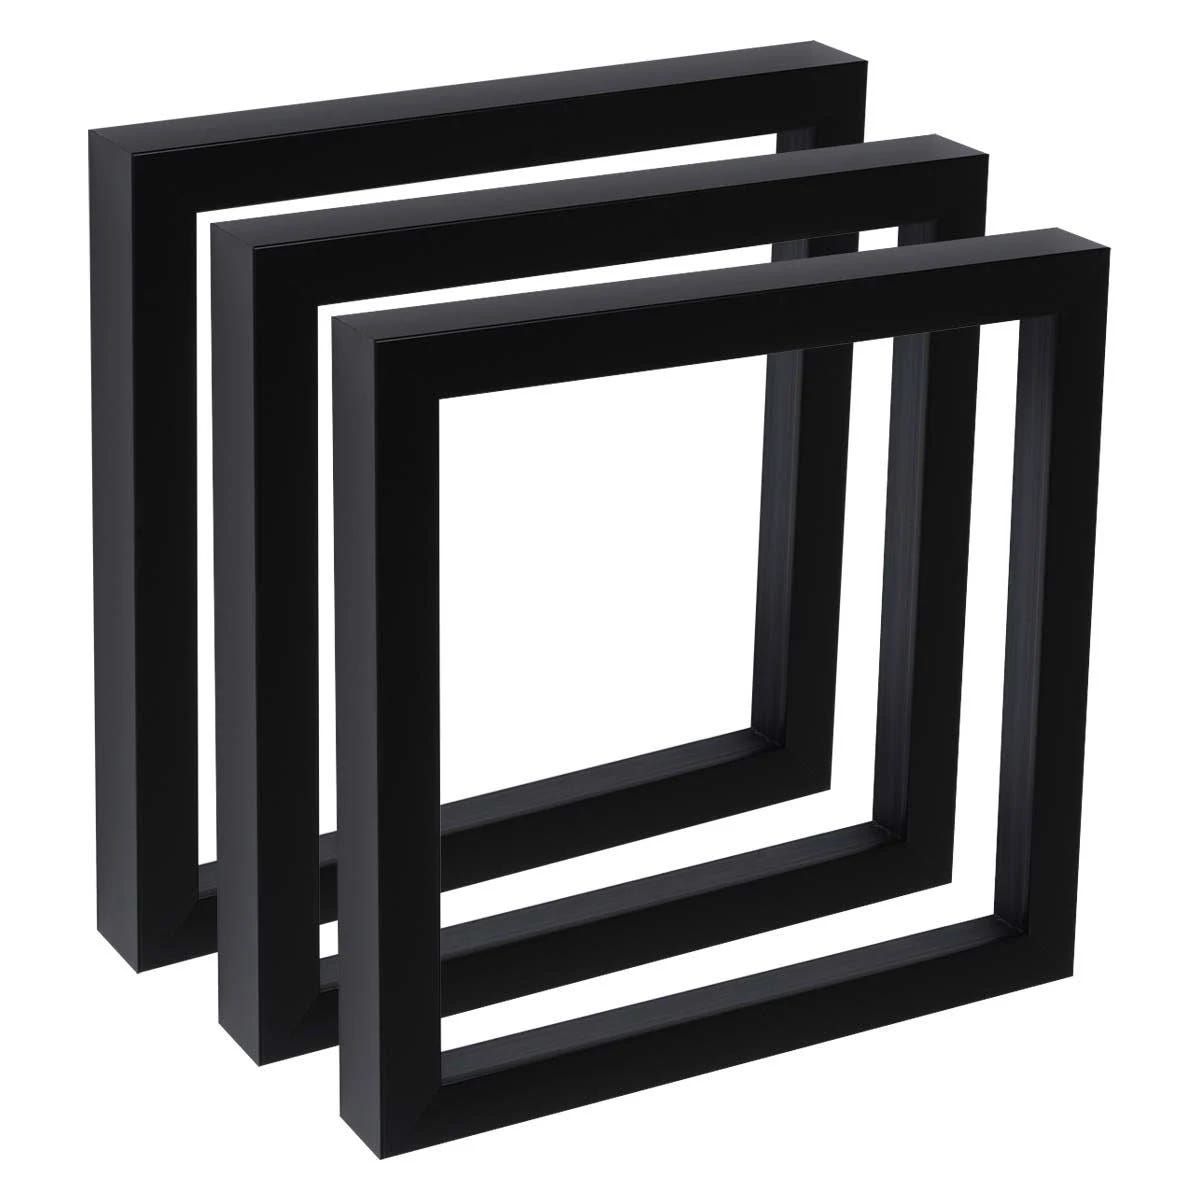 Professional 18 x 18 Deep Gallery Frames Set of 3 - No Glass/Backing | Image